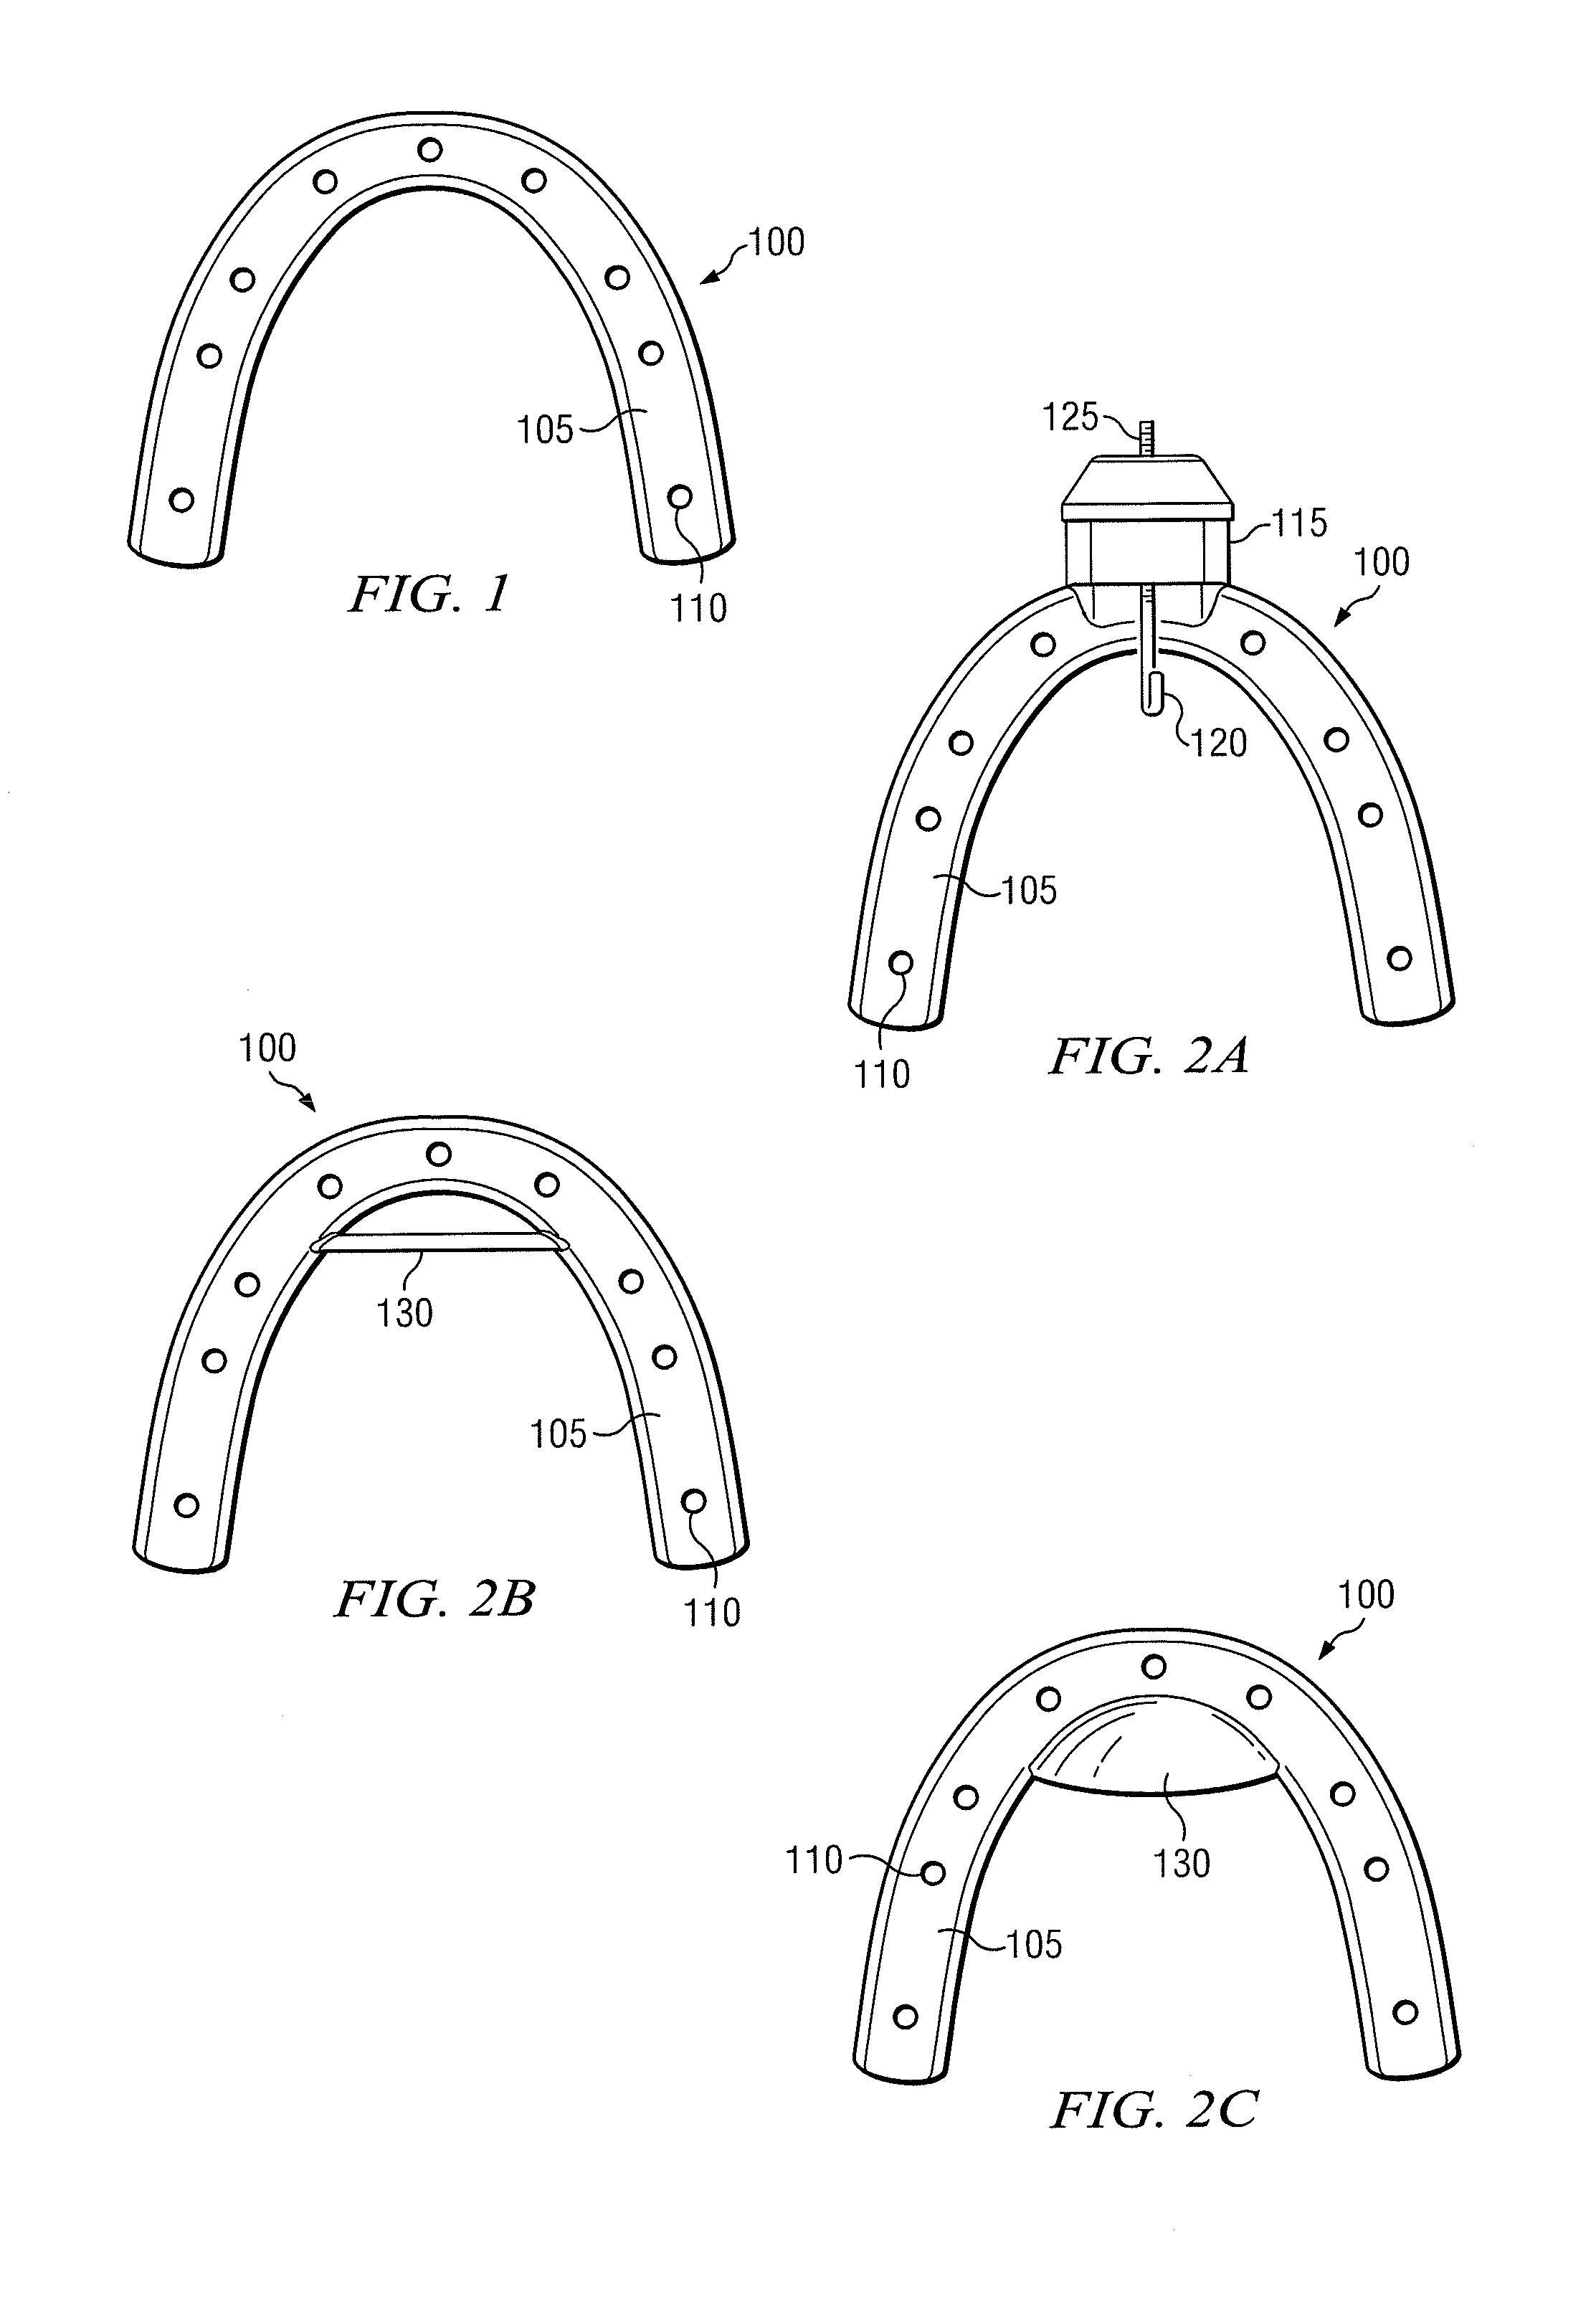 Apparatus for improved breathing